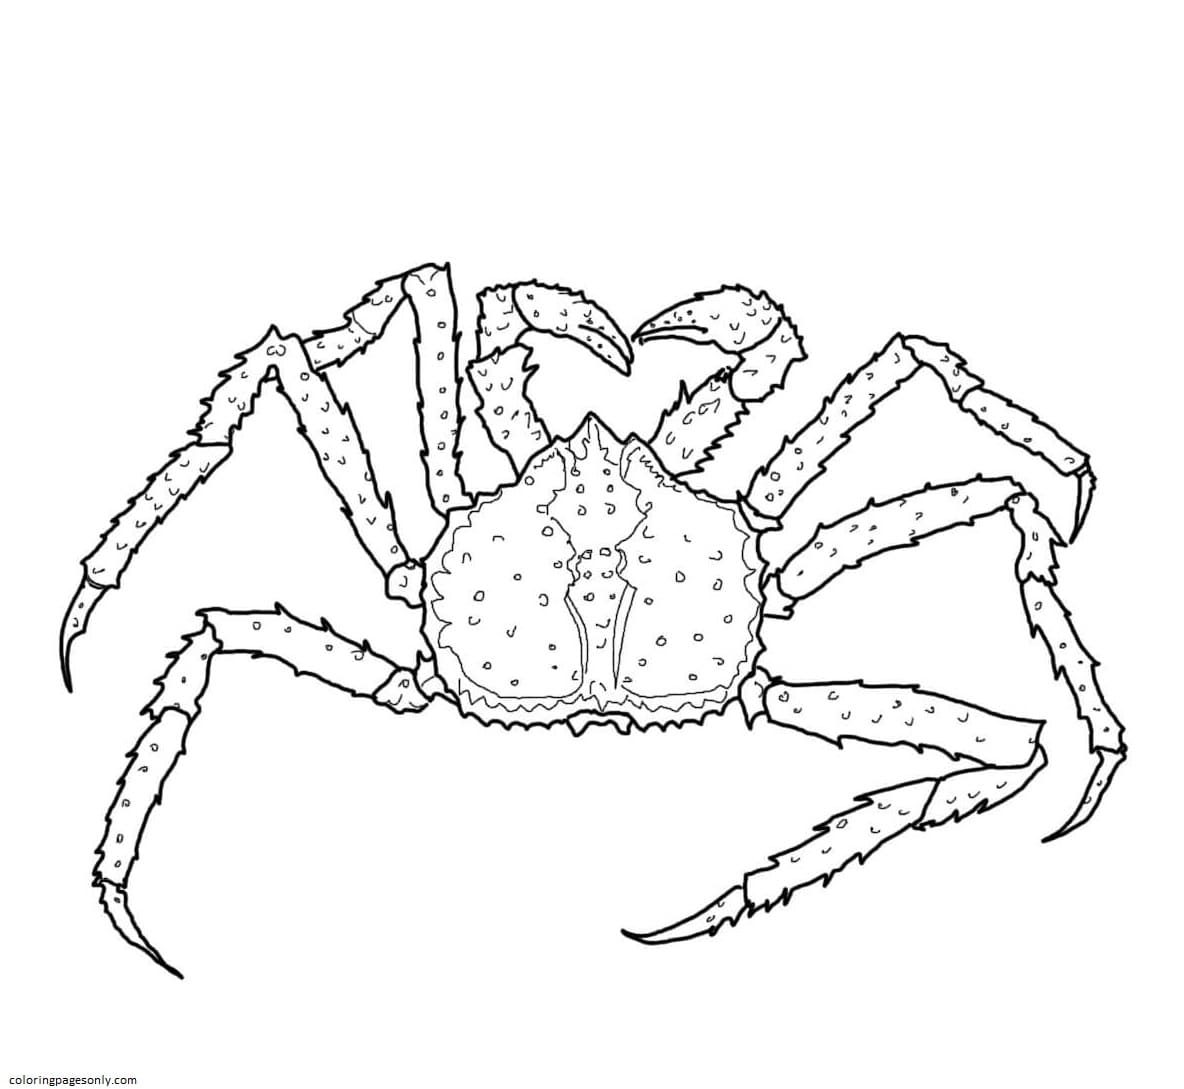 Crab Coloring Pages   Coloring Pages For Kids And Adults